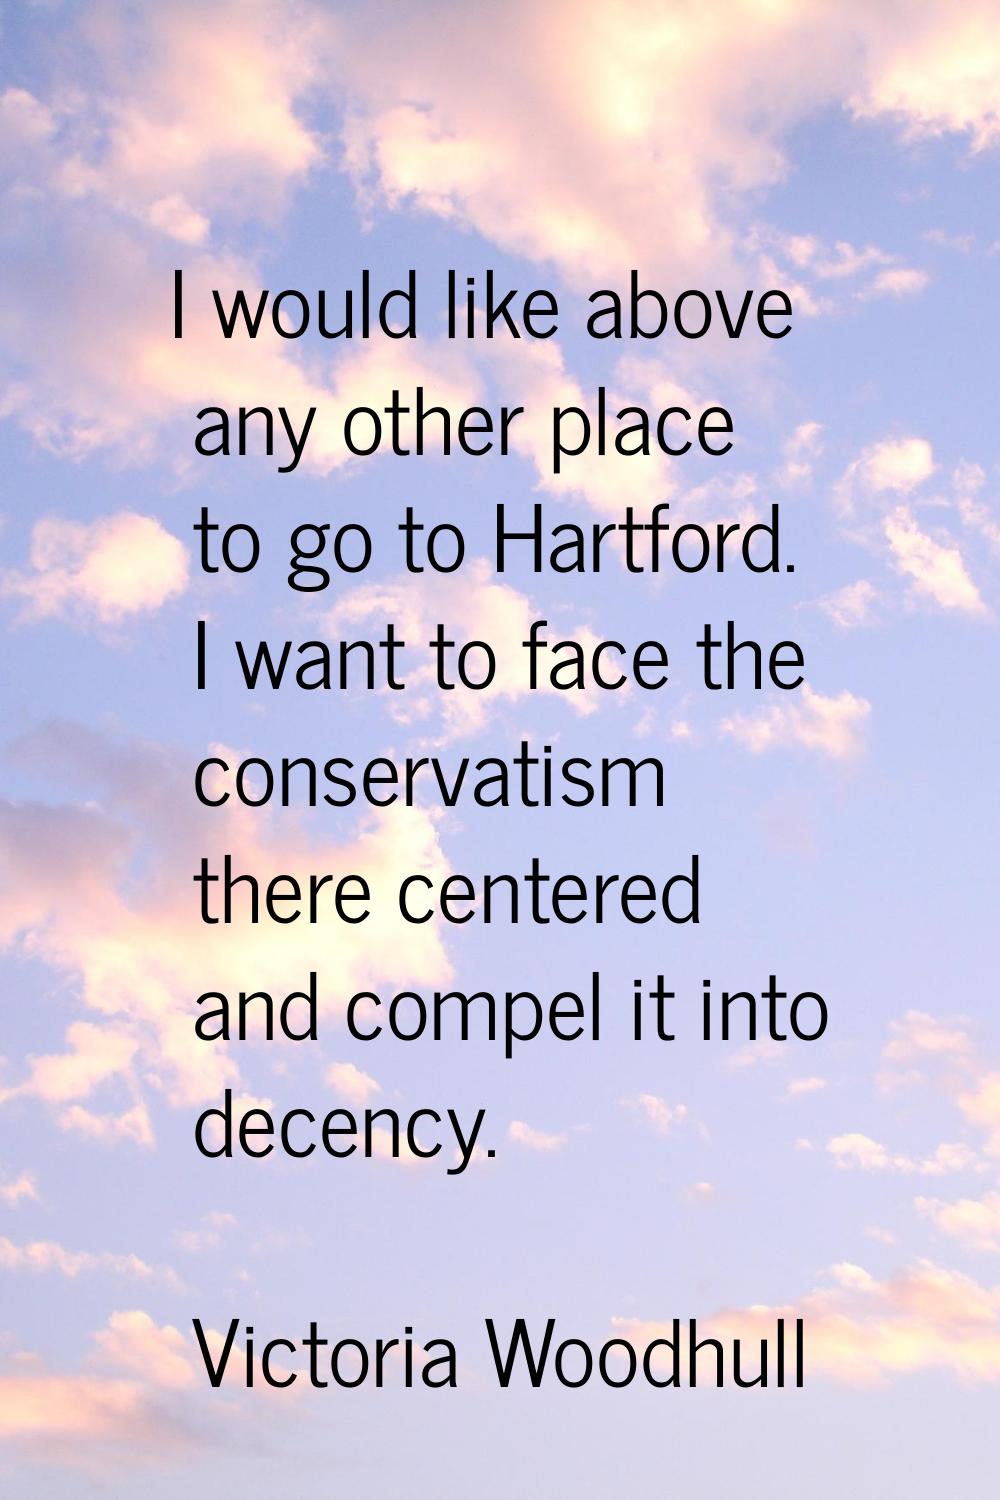 I would like above any other place to go to Hartford. I want to face the conservatism there centere